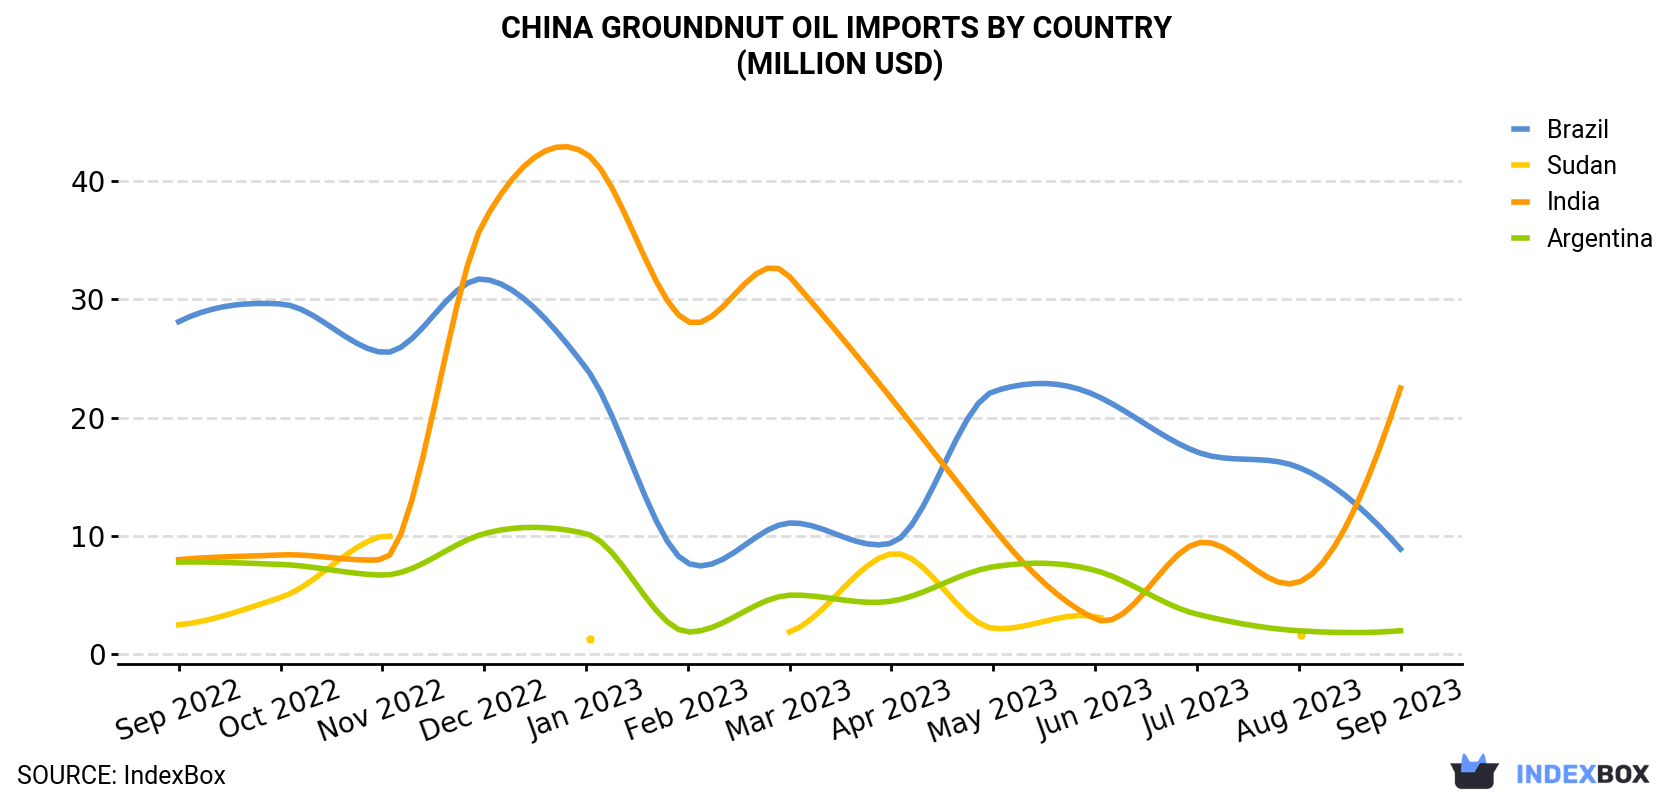 China Groundnut Oil Imports By Country (Million USD)